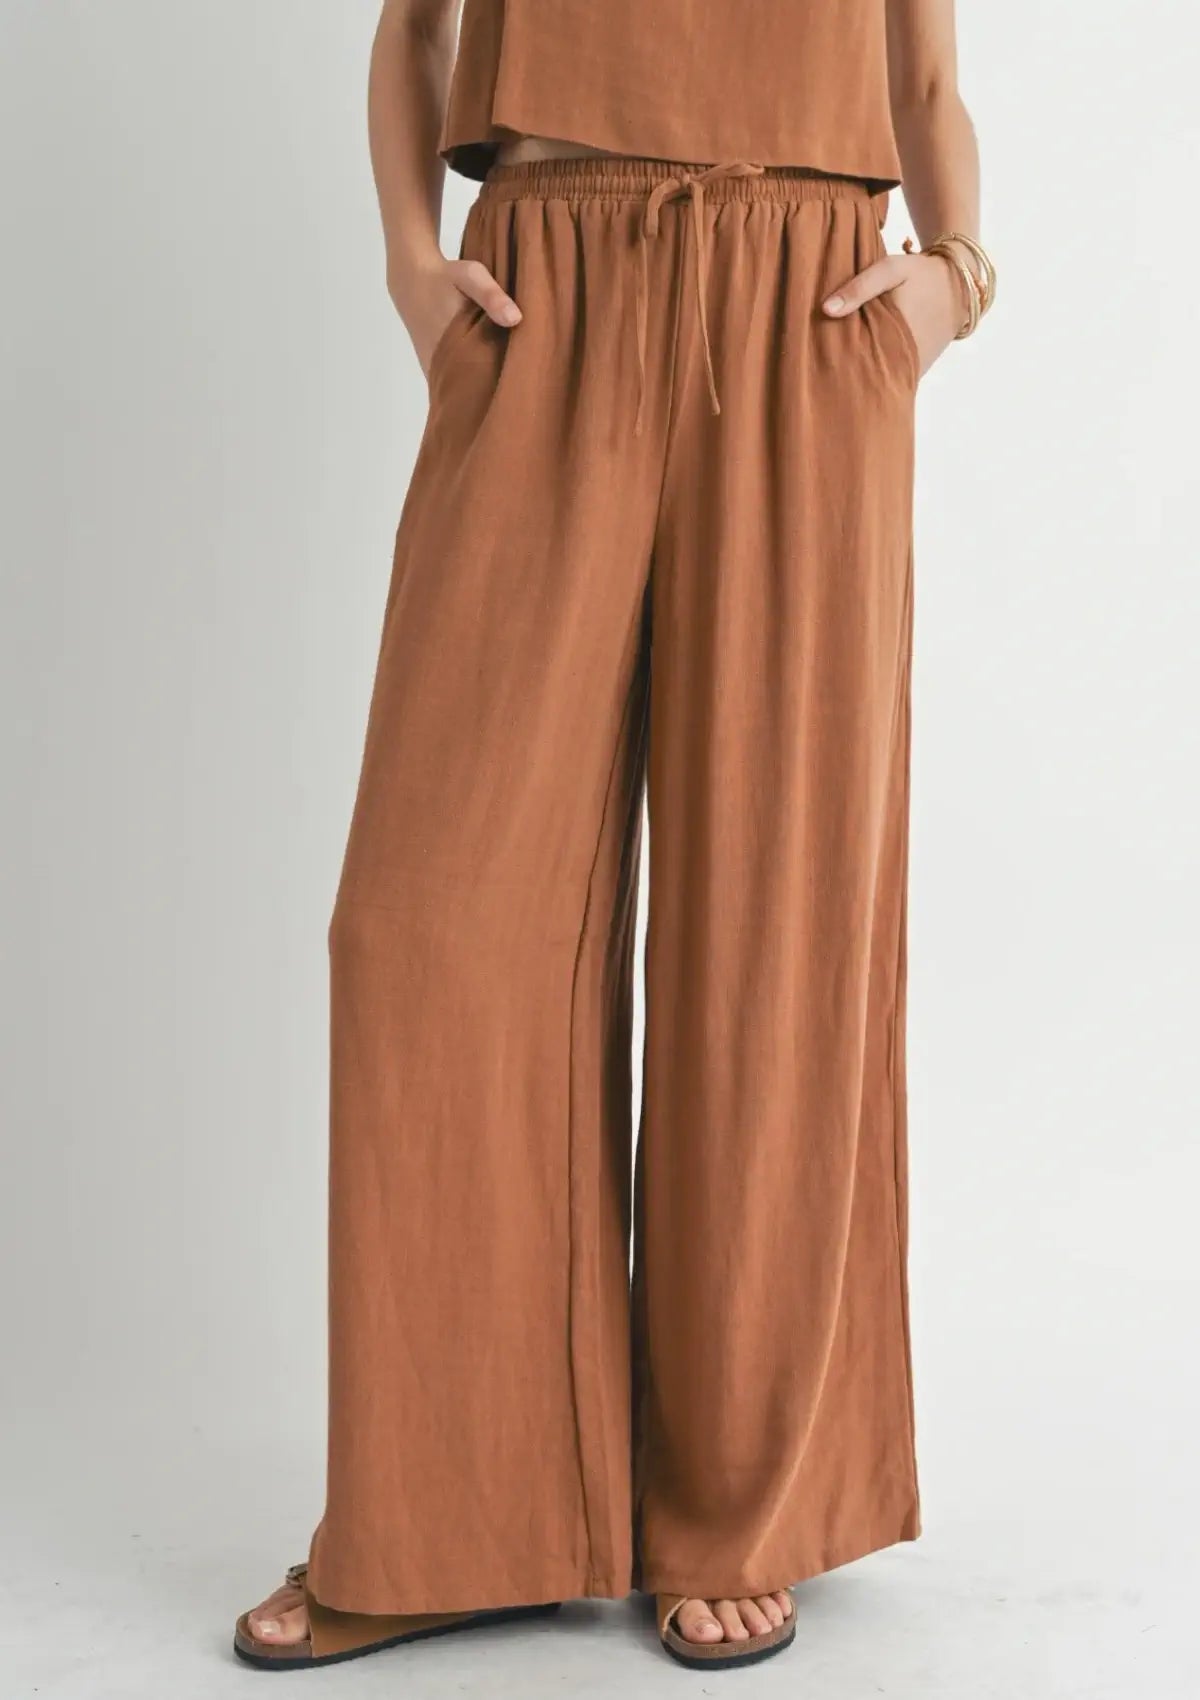 Fashion clothing brown pants at Ruby Jane & valleygirl boutique.